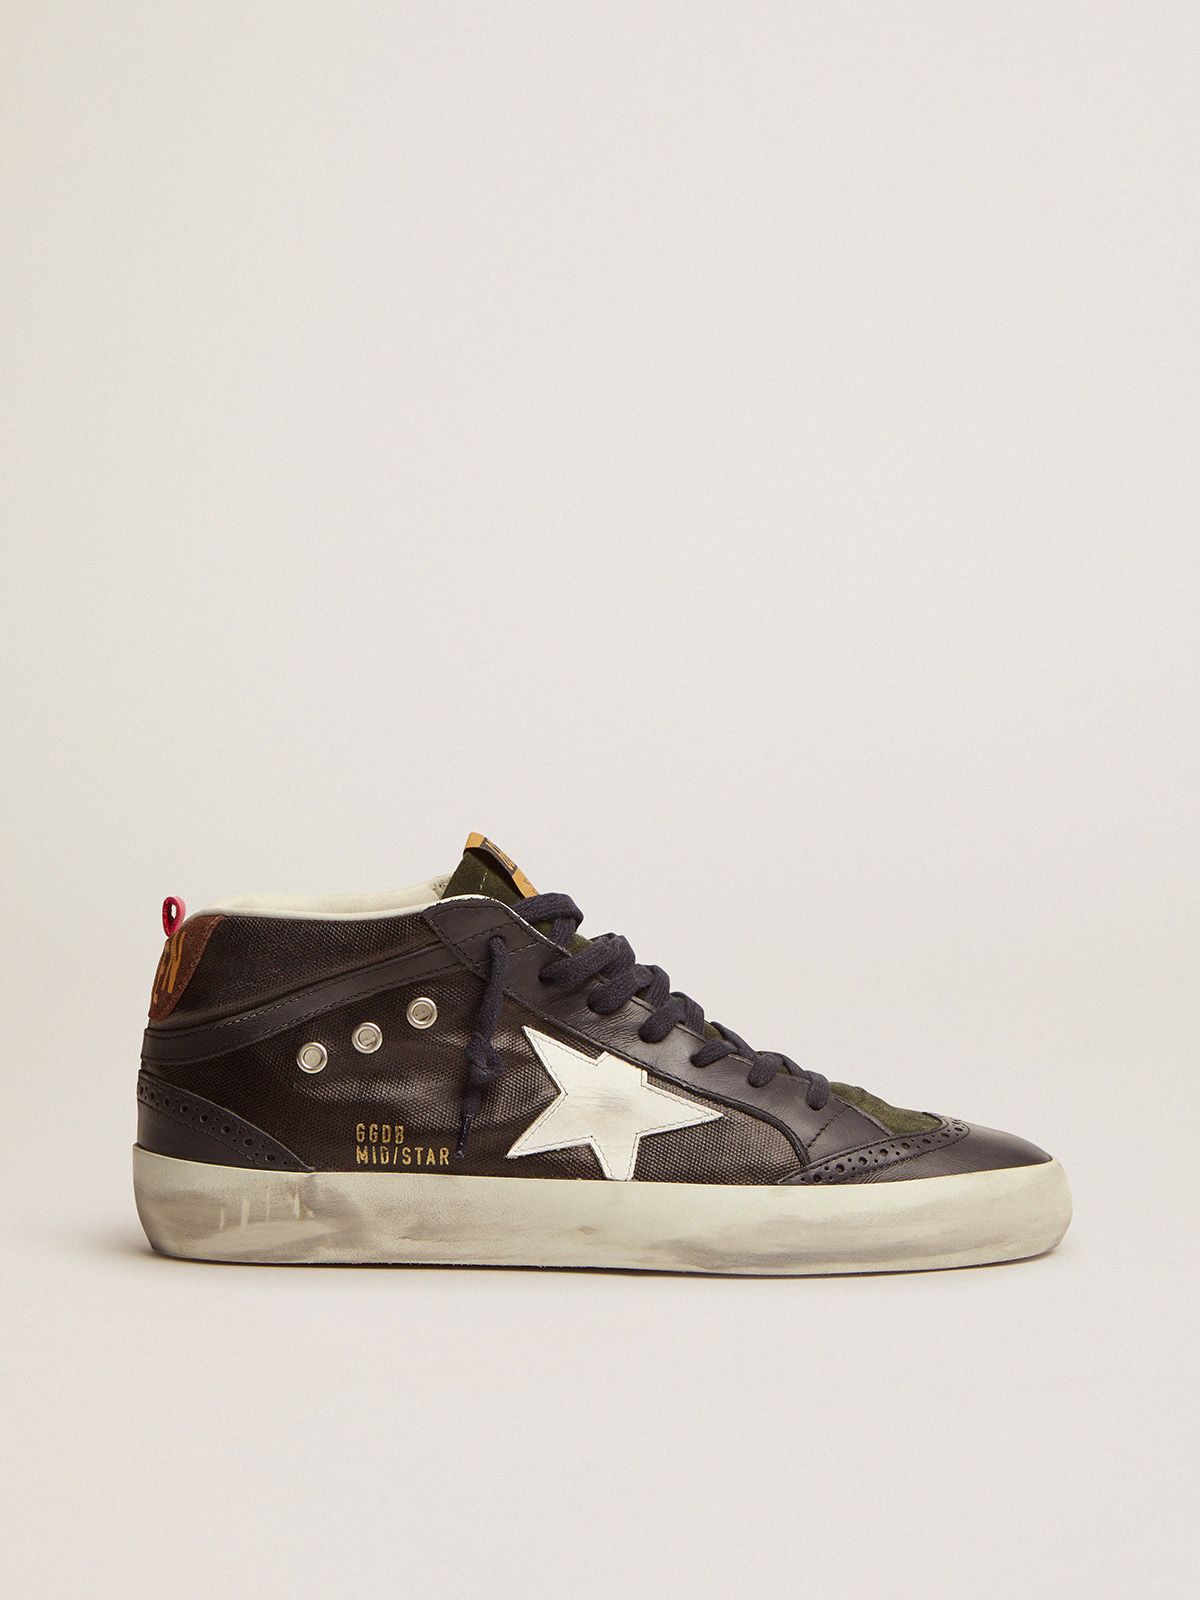 golden goose Mid Star in white dark canvas blue leather sneakers with star